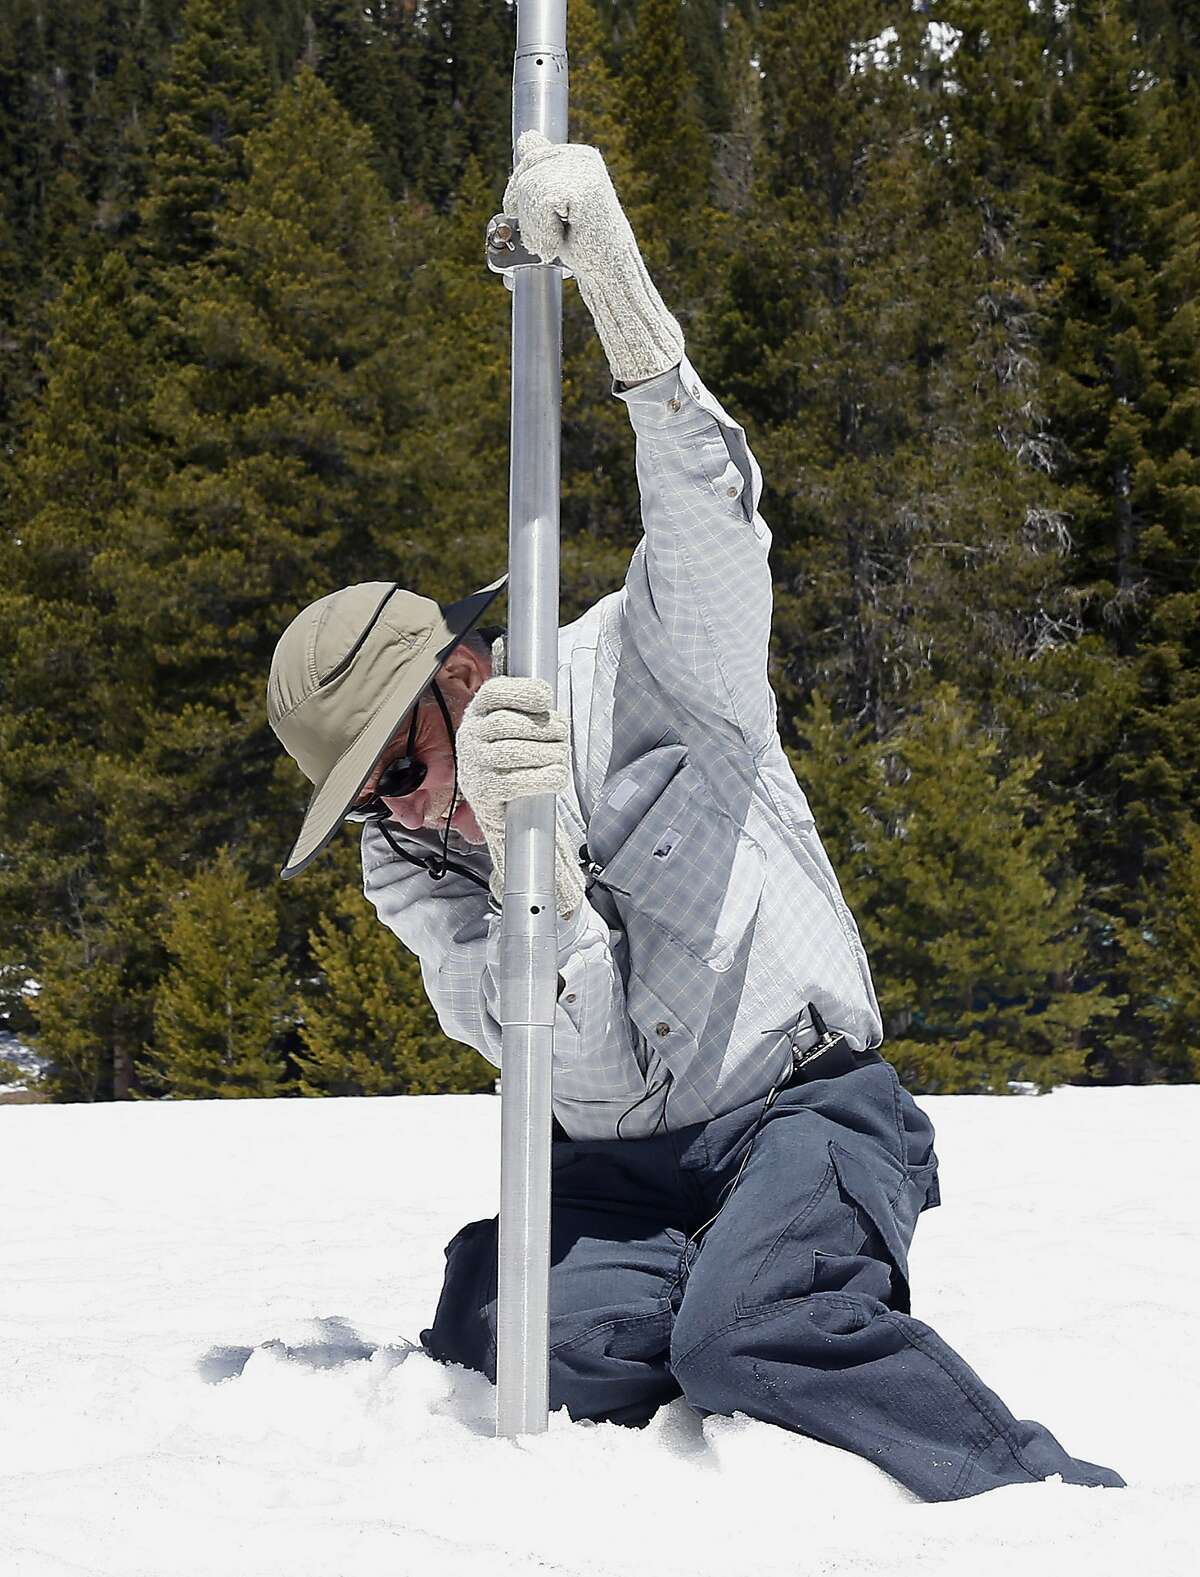 Frank Gehrke, chief of the California Cooperative Snow Surveys Program for the Department of Water Resources, plunges the snow survey tube into the snow pack, during the snow survey at Phillips Station, Monday, May 1, 2017, near Echo Summit, Calif. (AP Photo/Rich Pedroncelli)